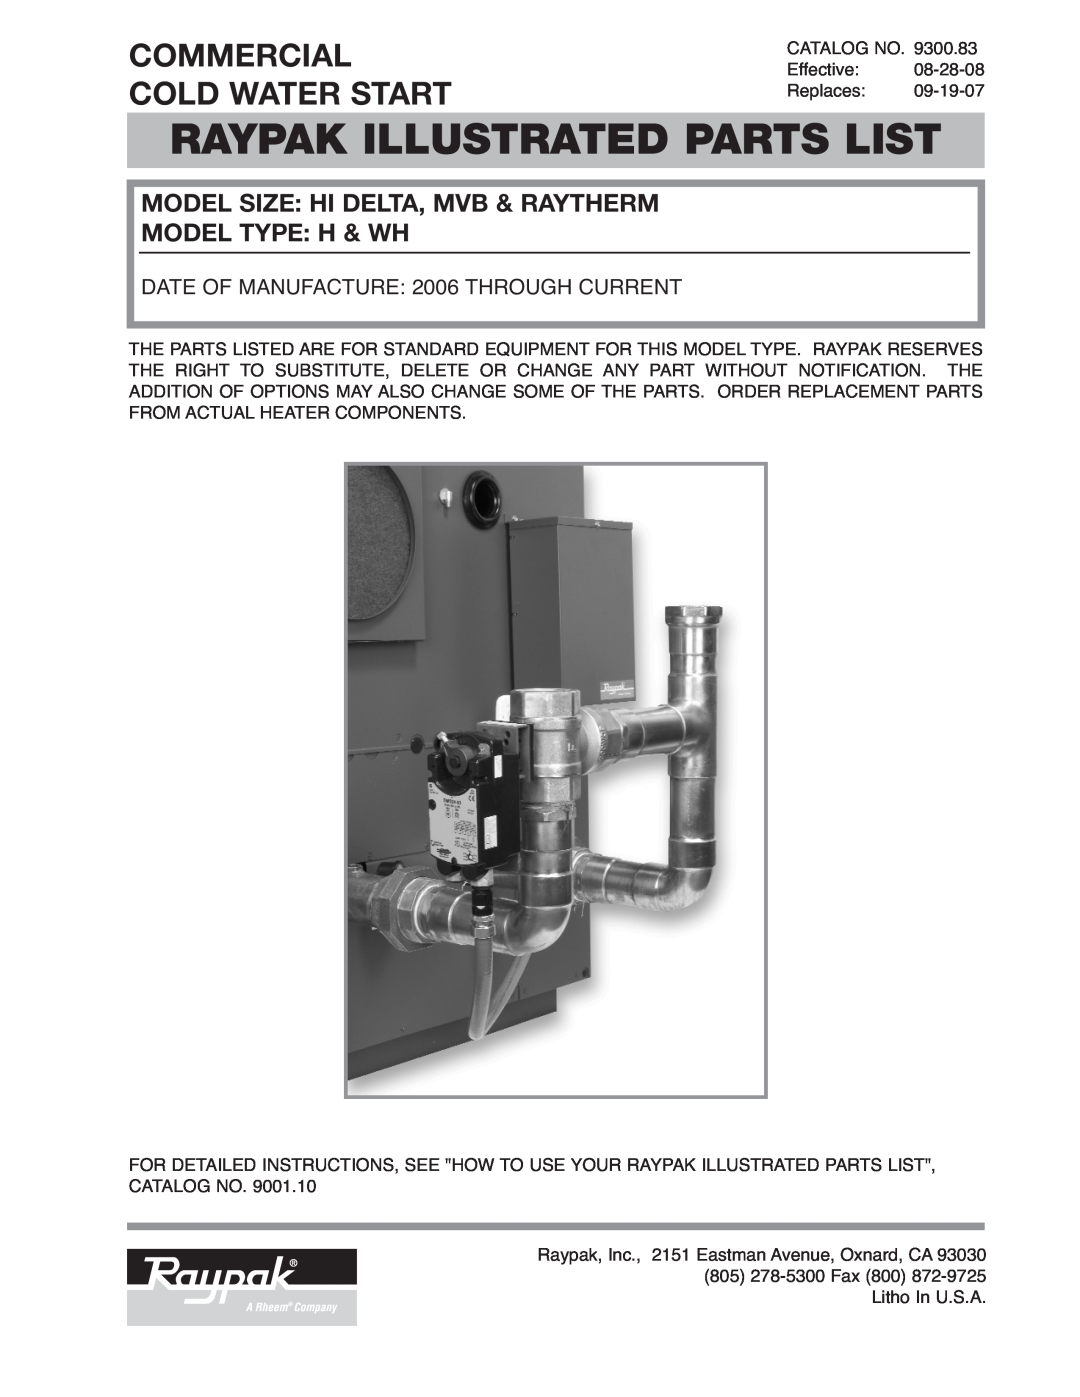 Raypak Commercial Cold Water Start manual Raypak Illustrated Parts List, Model Size Hi Delta, Mvb & Raytherm 